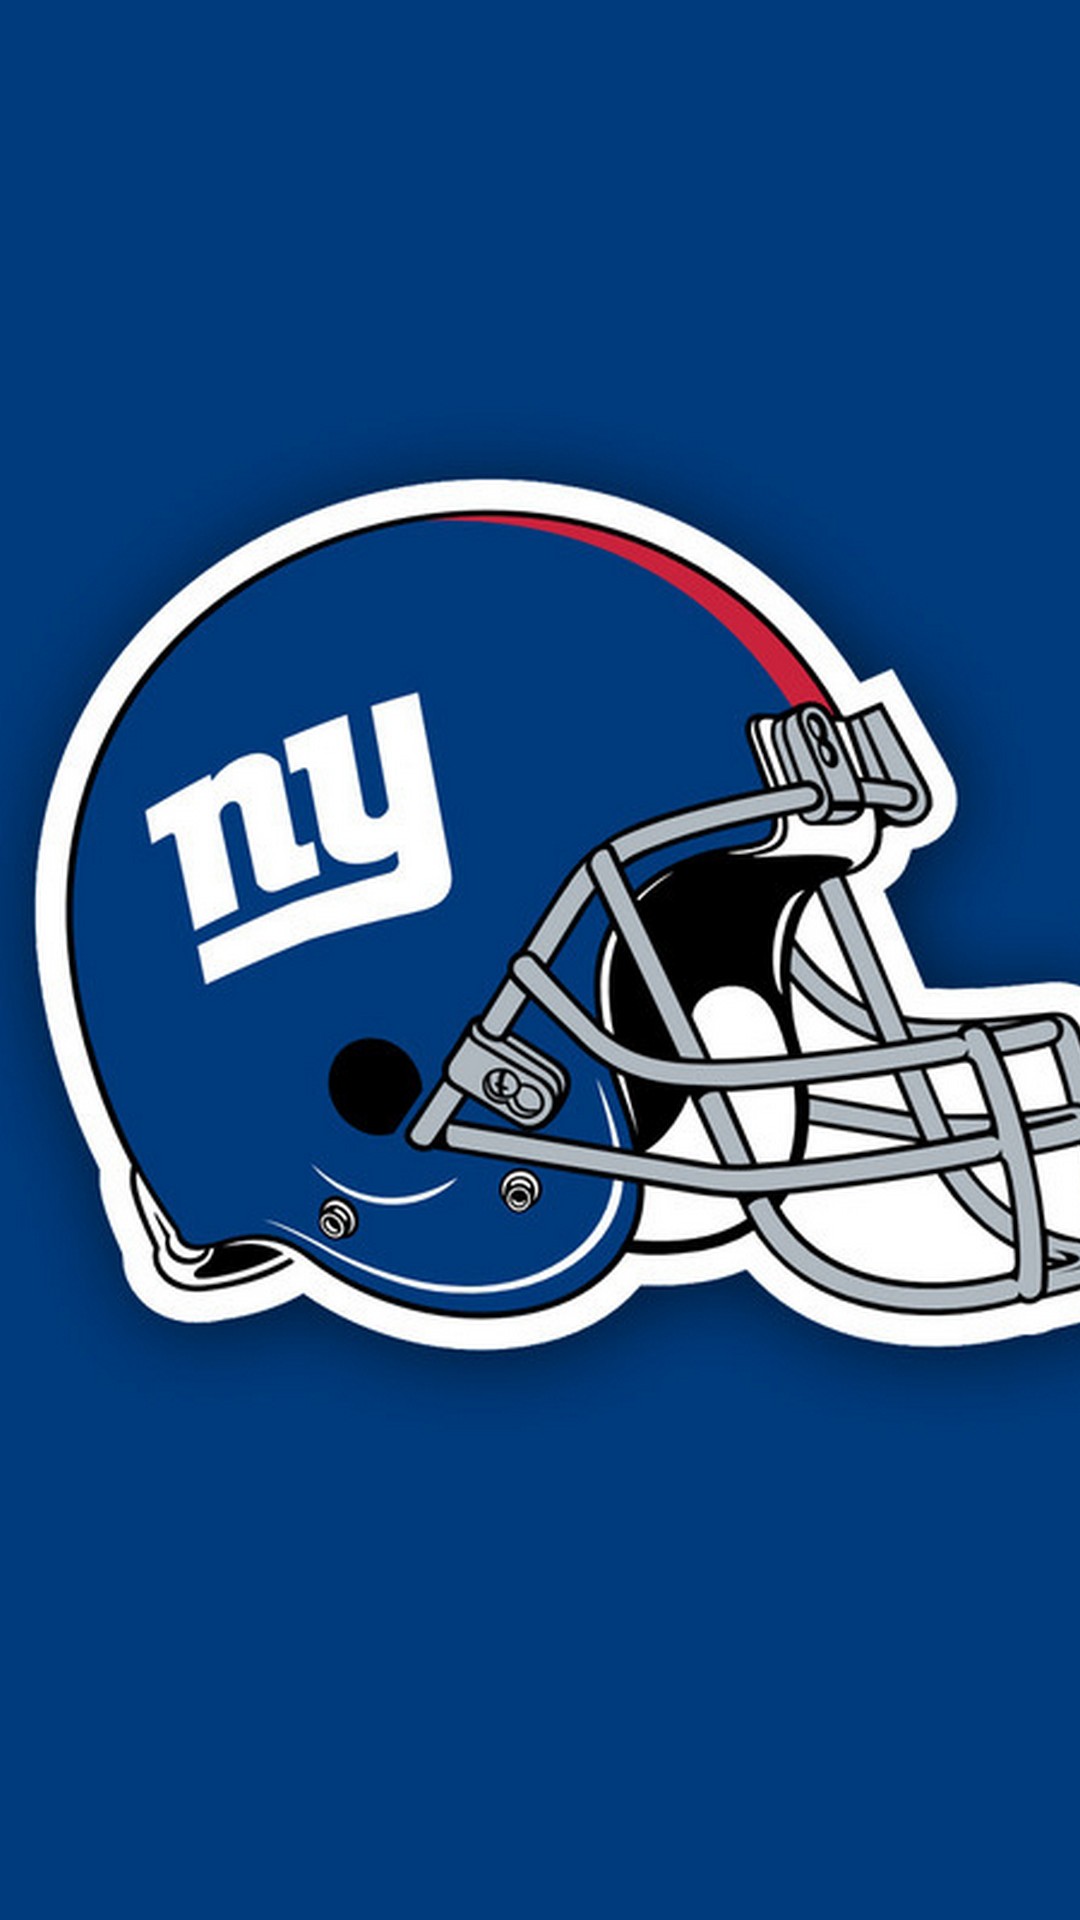 New York Giants iPhone Backgrounds with high-resolution 1080x1920 pixel. Download and set as wallpaper for Desktop Computer, Apple iPhone X, XS Max, XR, 8, 7, 6, SE, iPad, Android